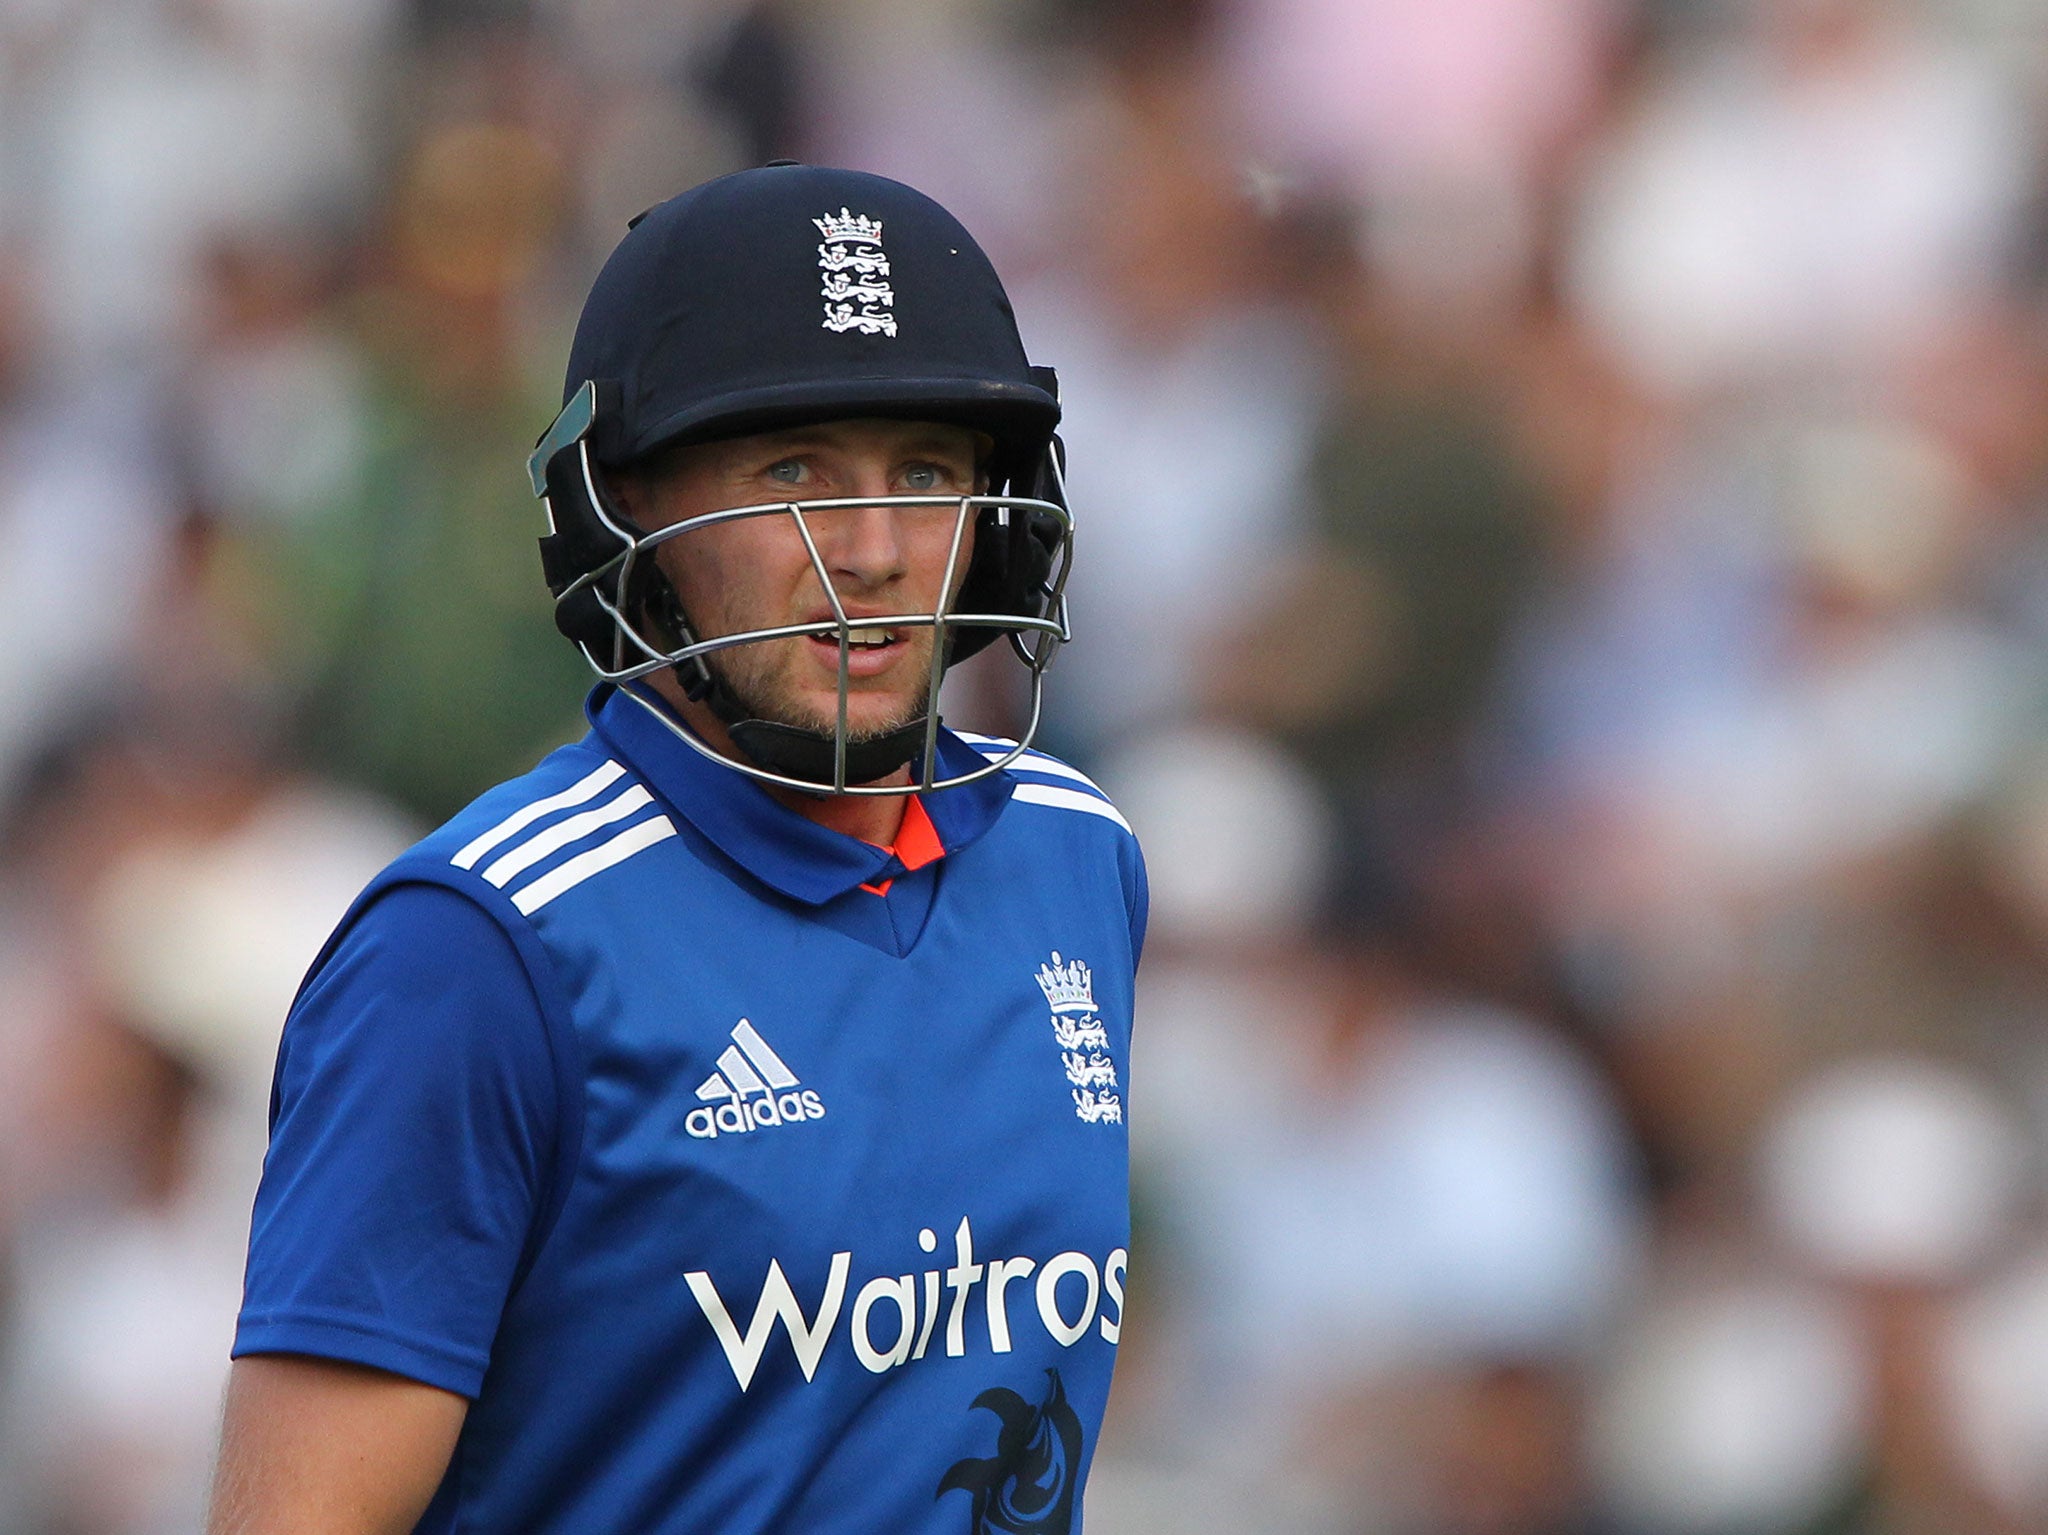 Joe Root was awarded man of the match for his performance